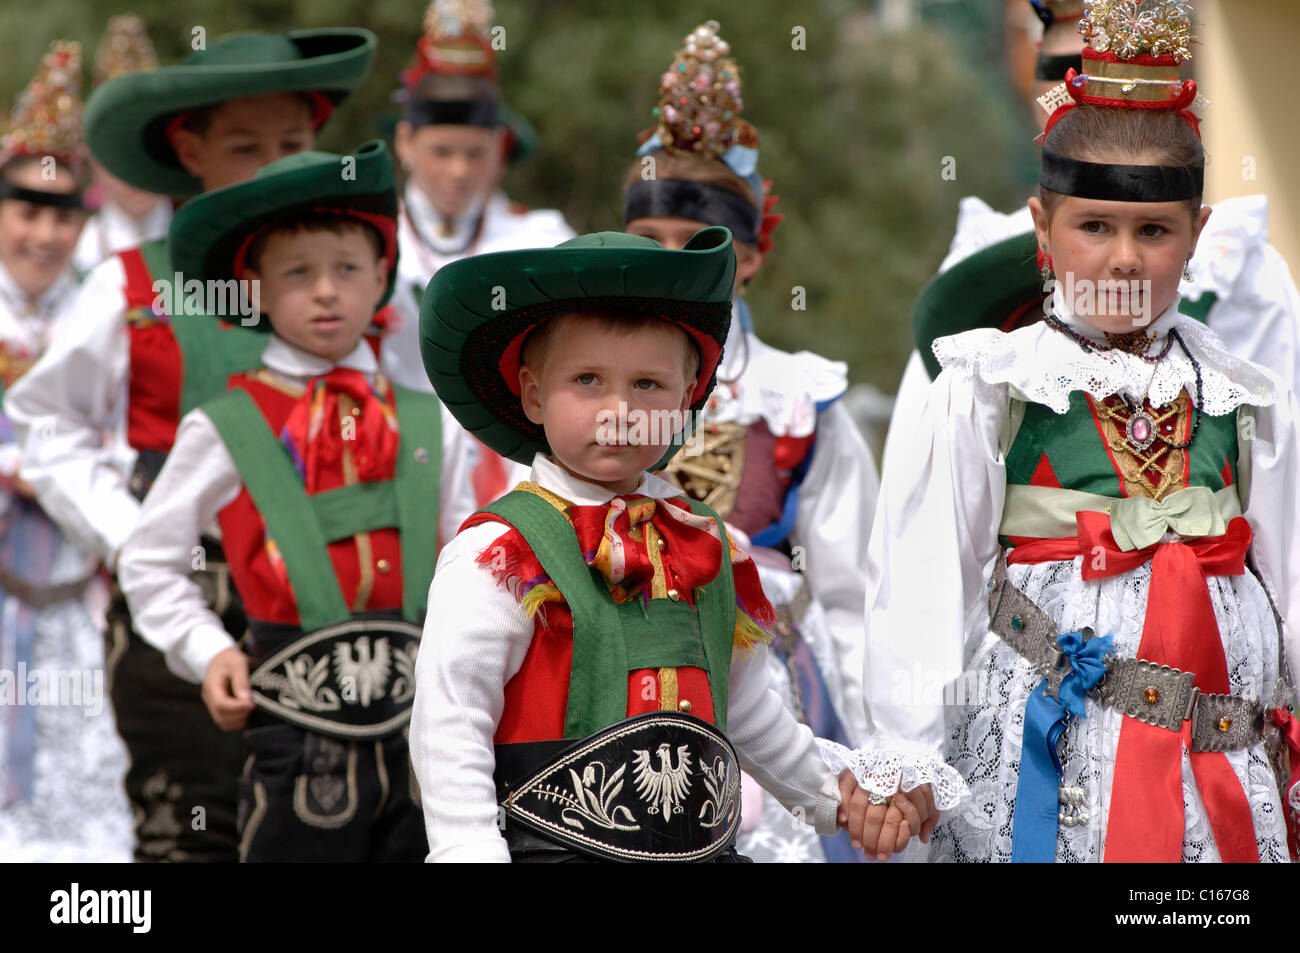 Children wearing traditional costumes of the Val Gardena Valley during a traditional procession in the village of Santa Cristina Stock Photo